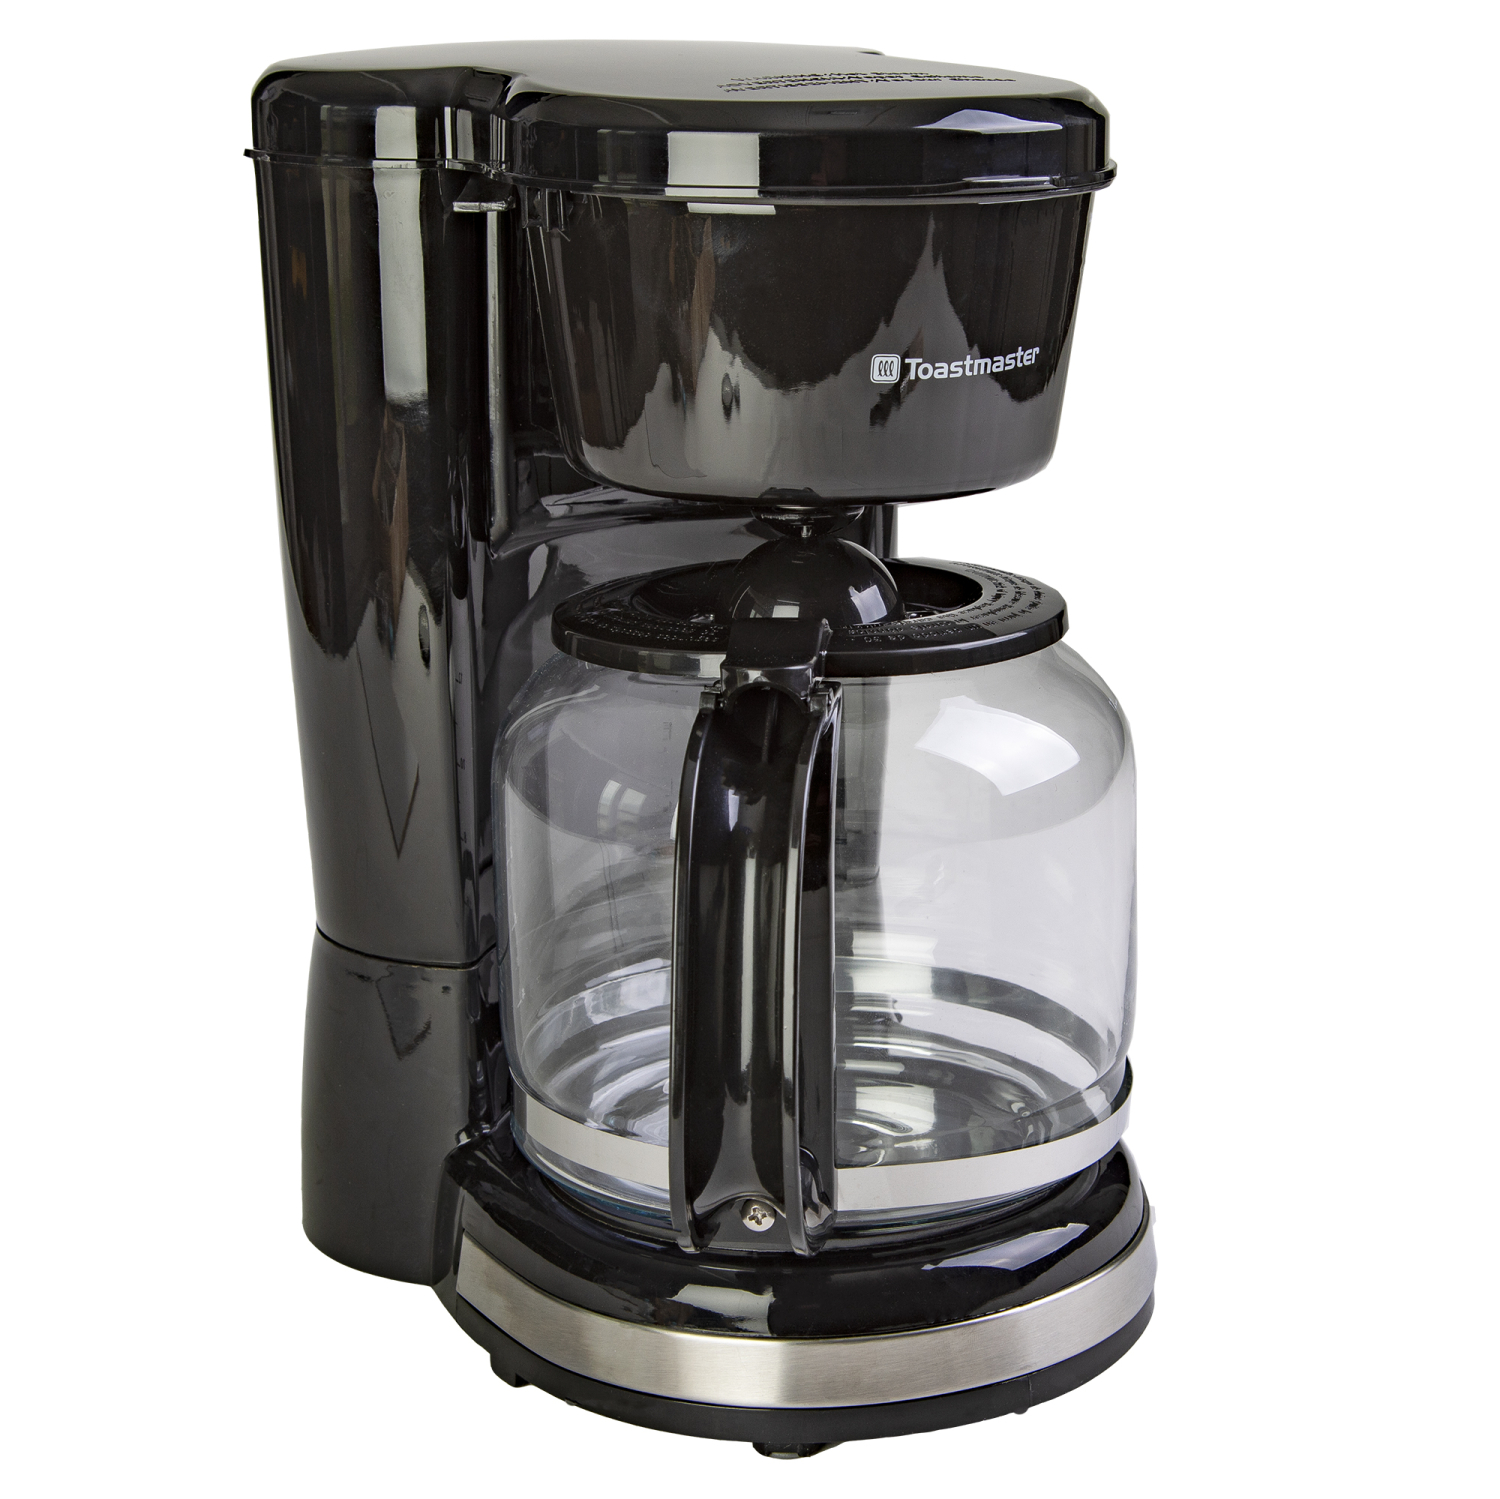 Toastmaster 12 Cup Coffee Maker 